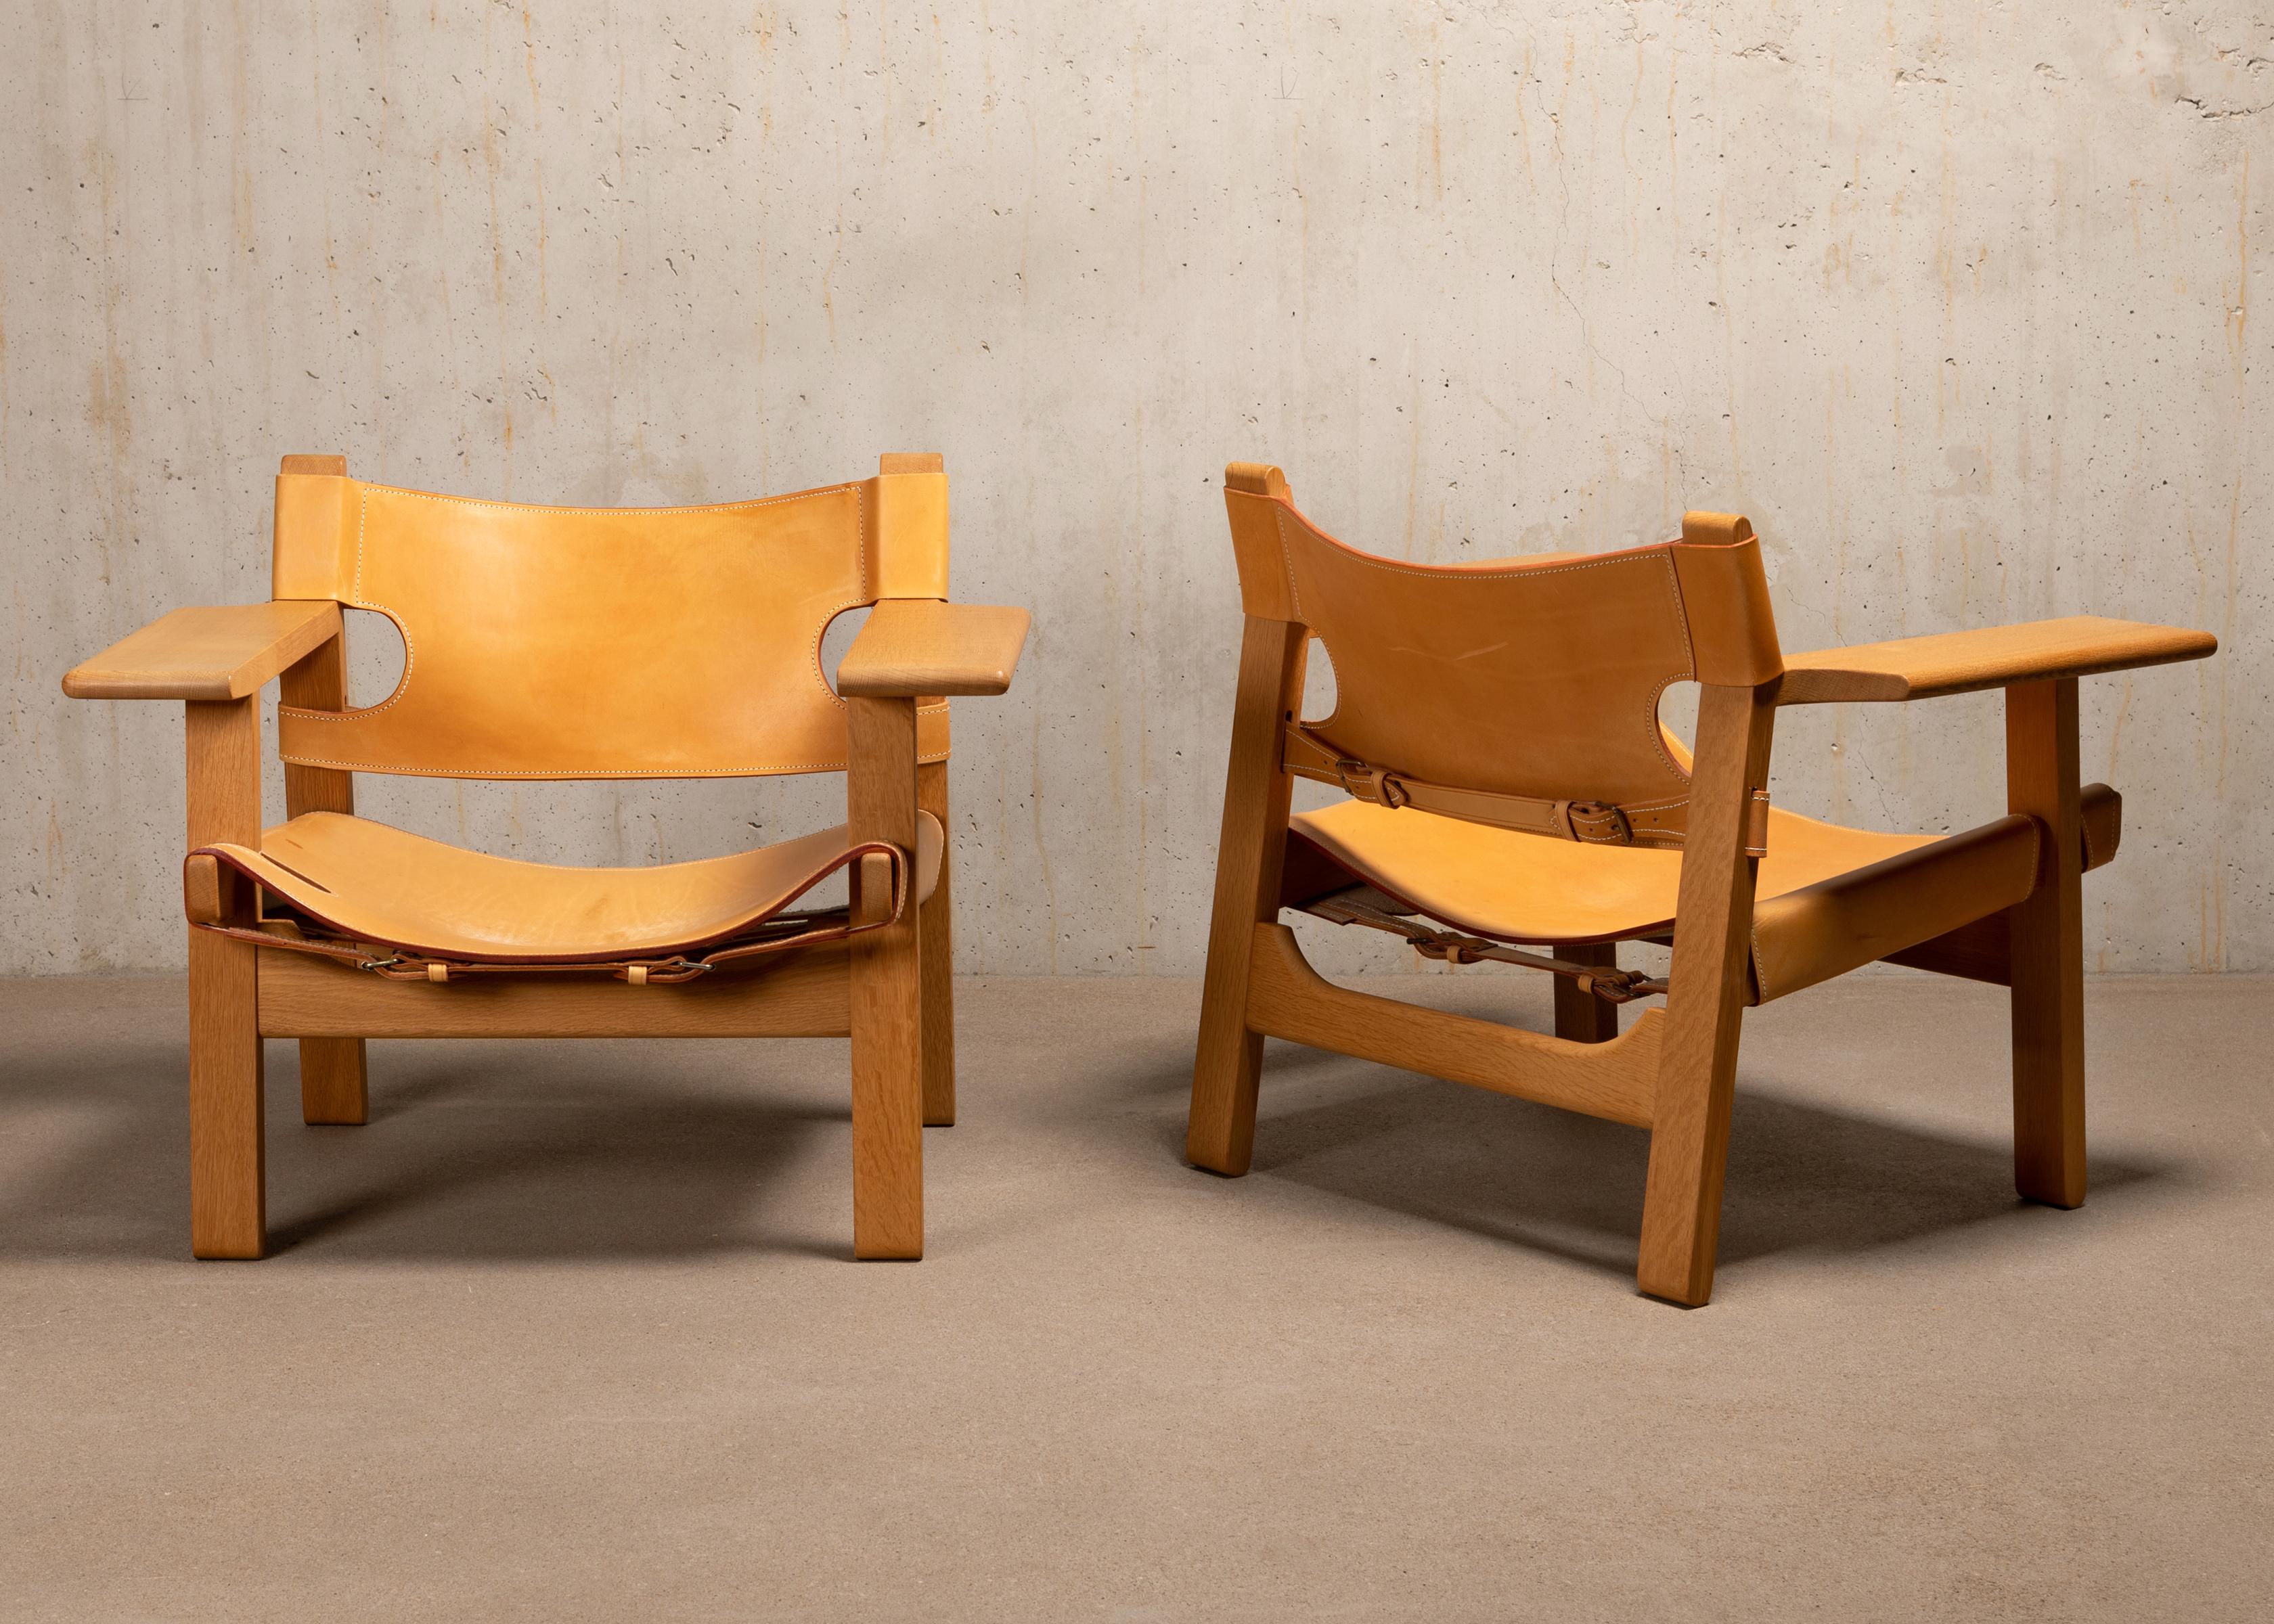 Iconic set of Spanish chairs by Børge Mogensen for Fredericia Stolefabrik, Denmark, 1958. Solid soaped oak frame with natural saddle leather all in very good / excellent vintage condition. Minor traces of use with beautiful young aged leather and